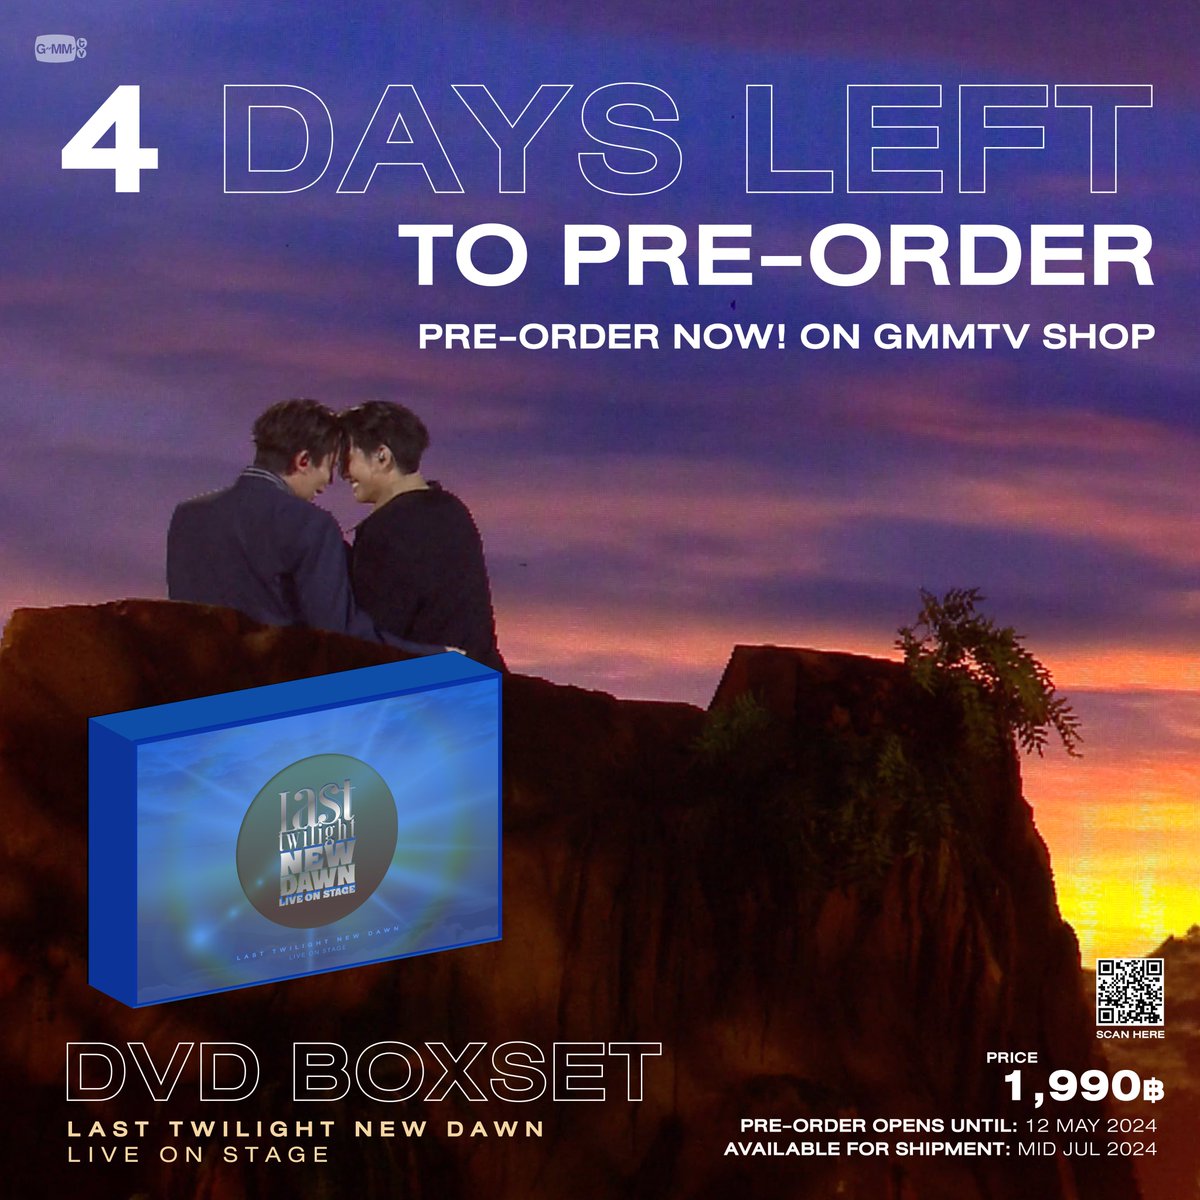 Hurry up and grab it because there are only 4 days left to pre-order the DVD BOXSET LAST TWILIGHT NEW DAWN LIVE ON STAGE, you guys. DVD BOXSET LAST TWILIGHT NEW DAWN LIVE ON STAGE gmm-tv.com/shop/dvd-boxse… #LastTwilightOnStage #GMMTV